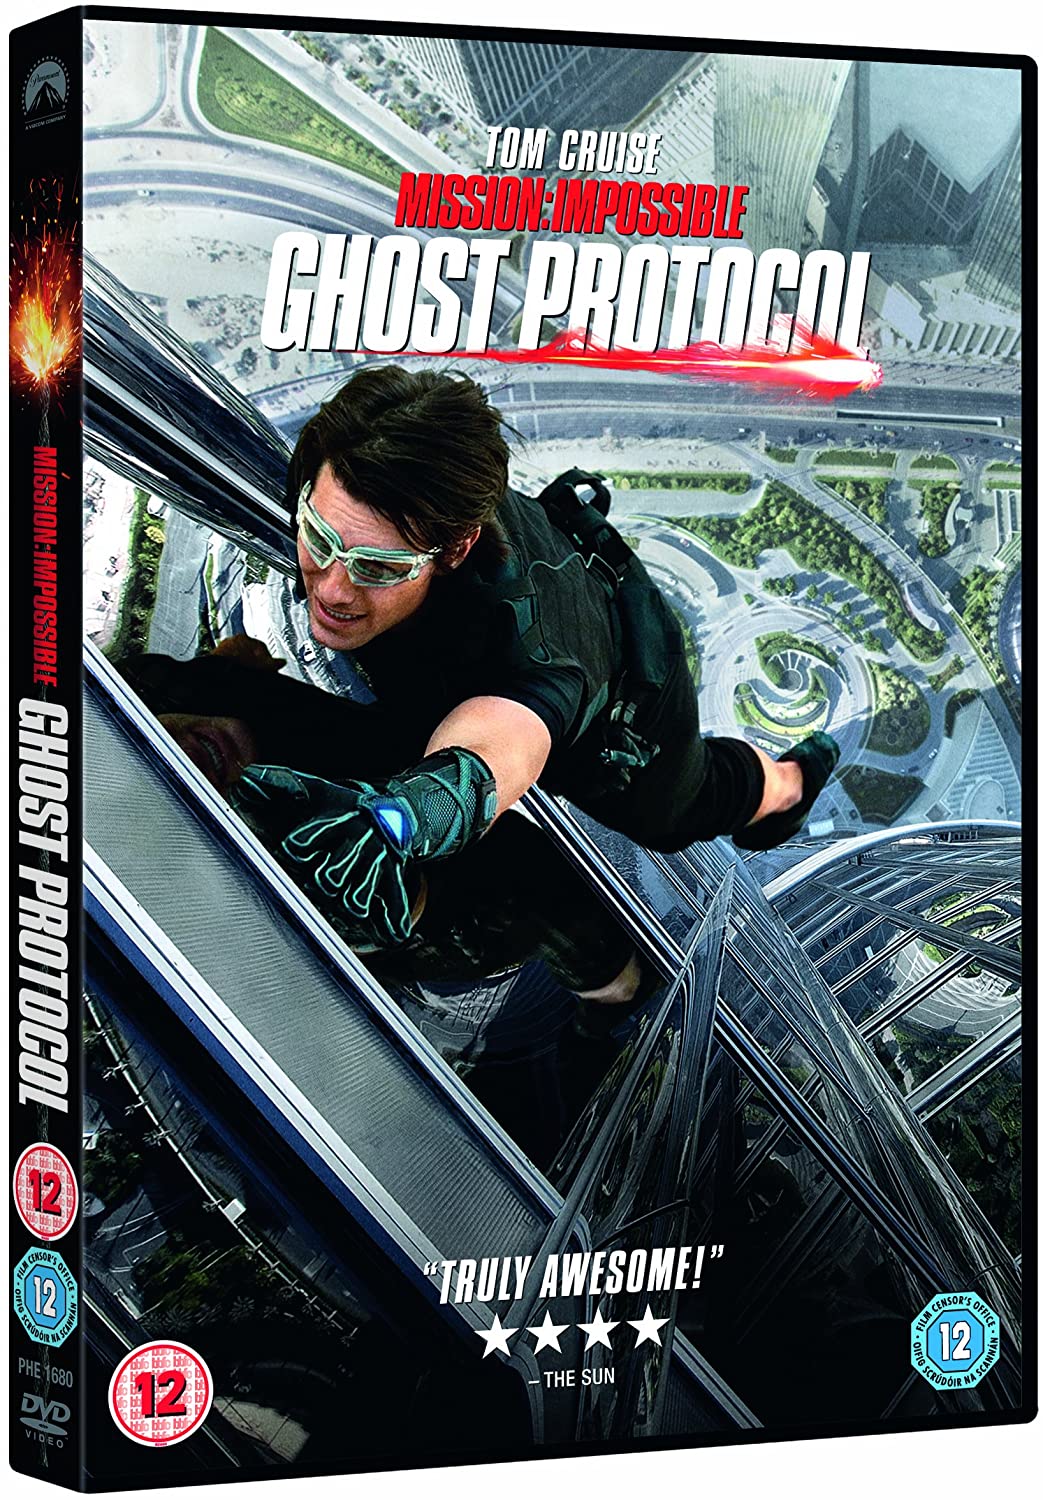 Mission Impossible: Ghost Protocol - Action/Thriller [DVD]